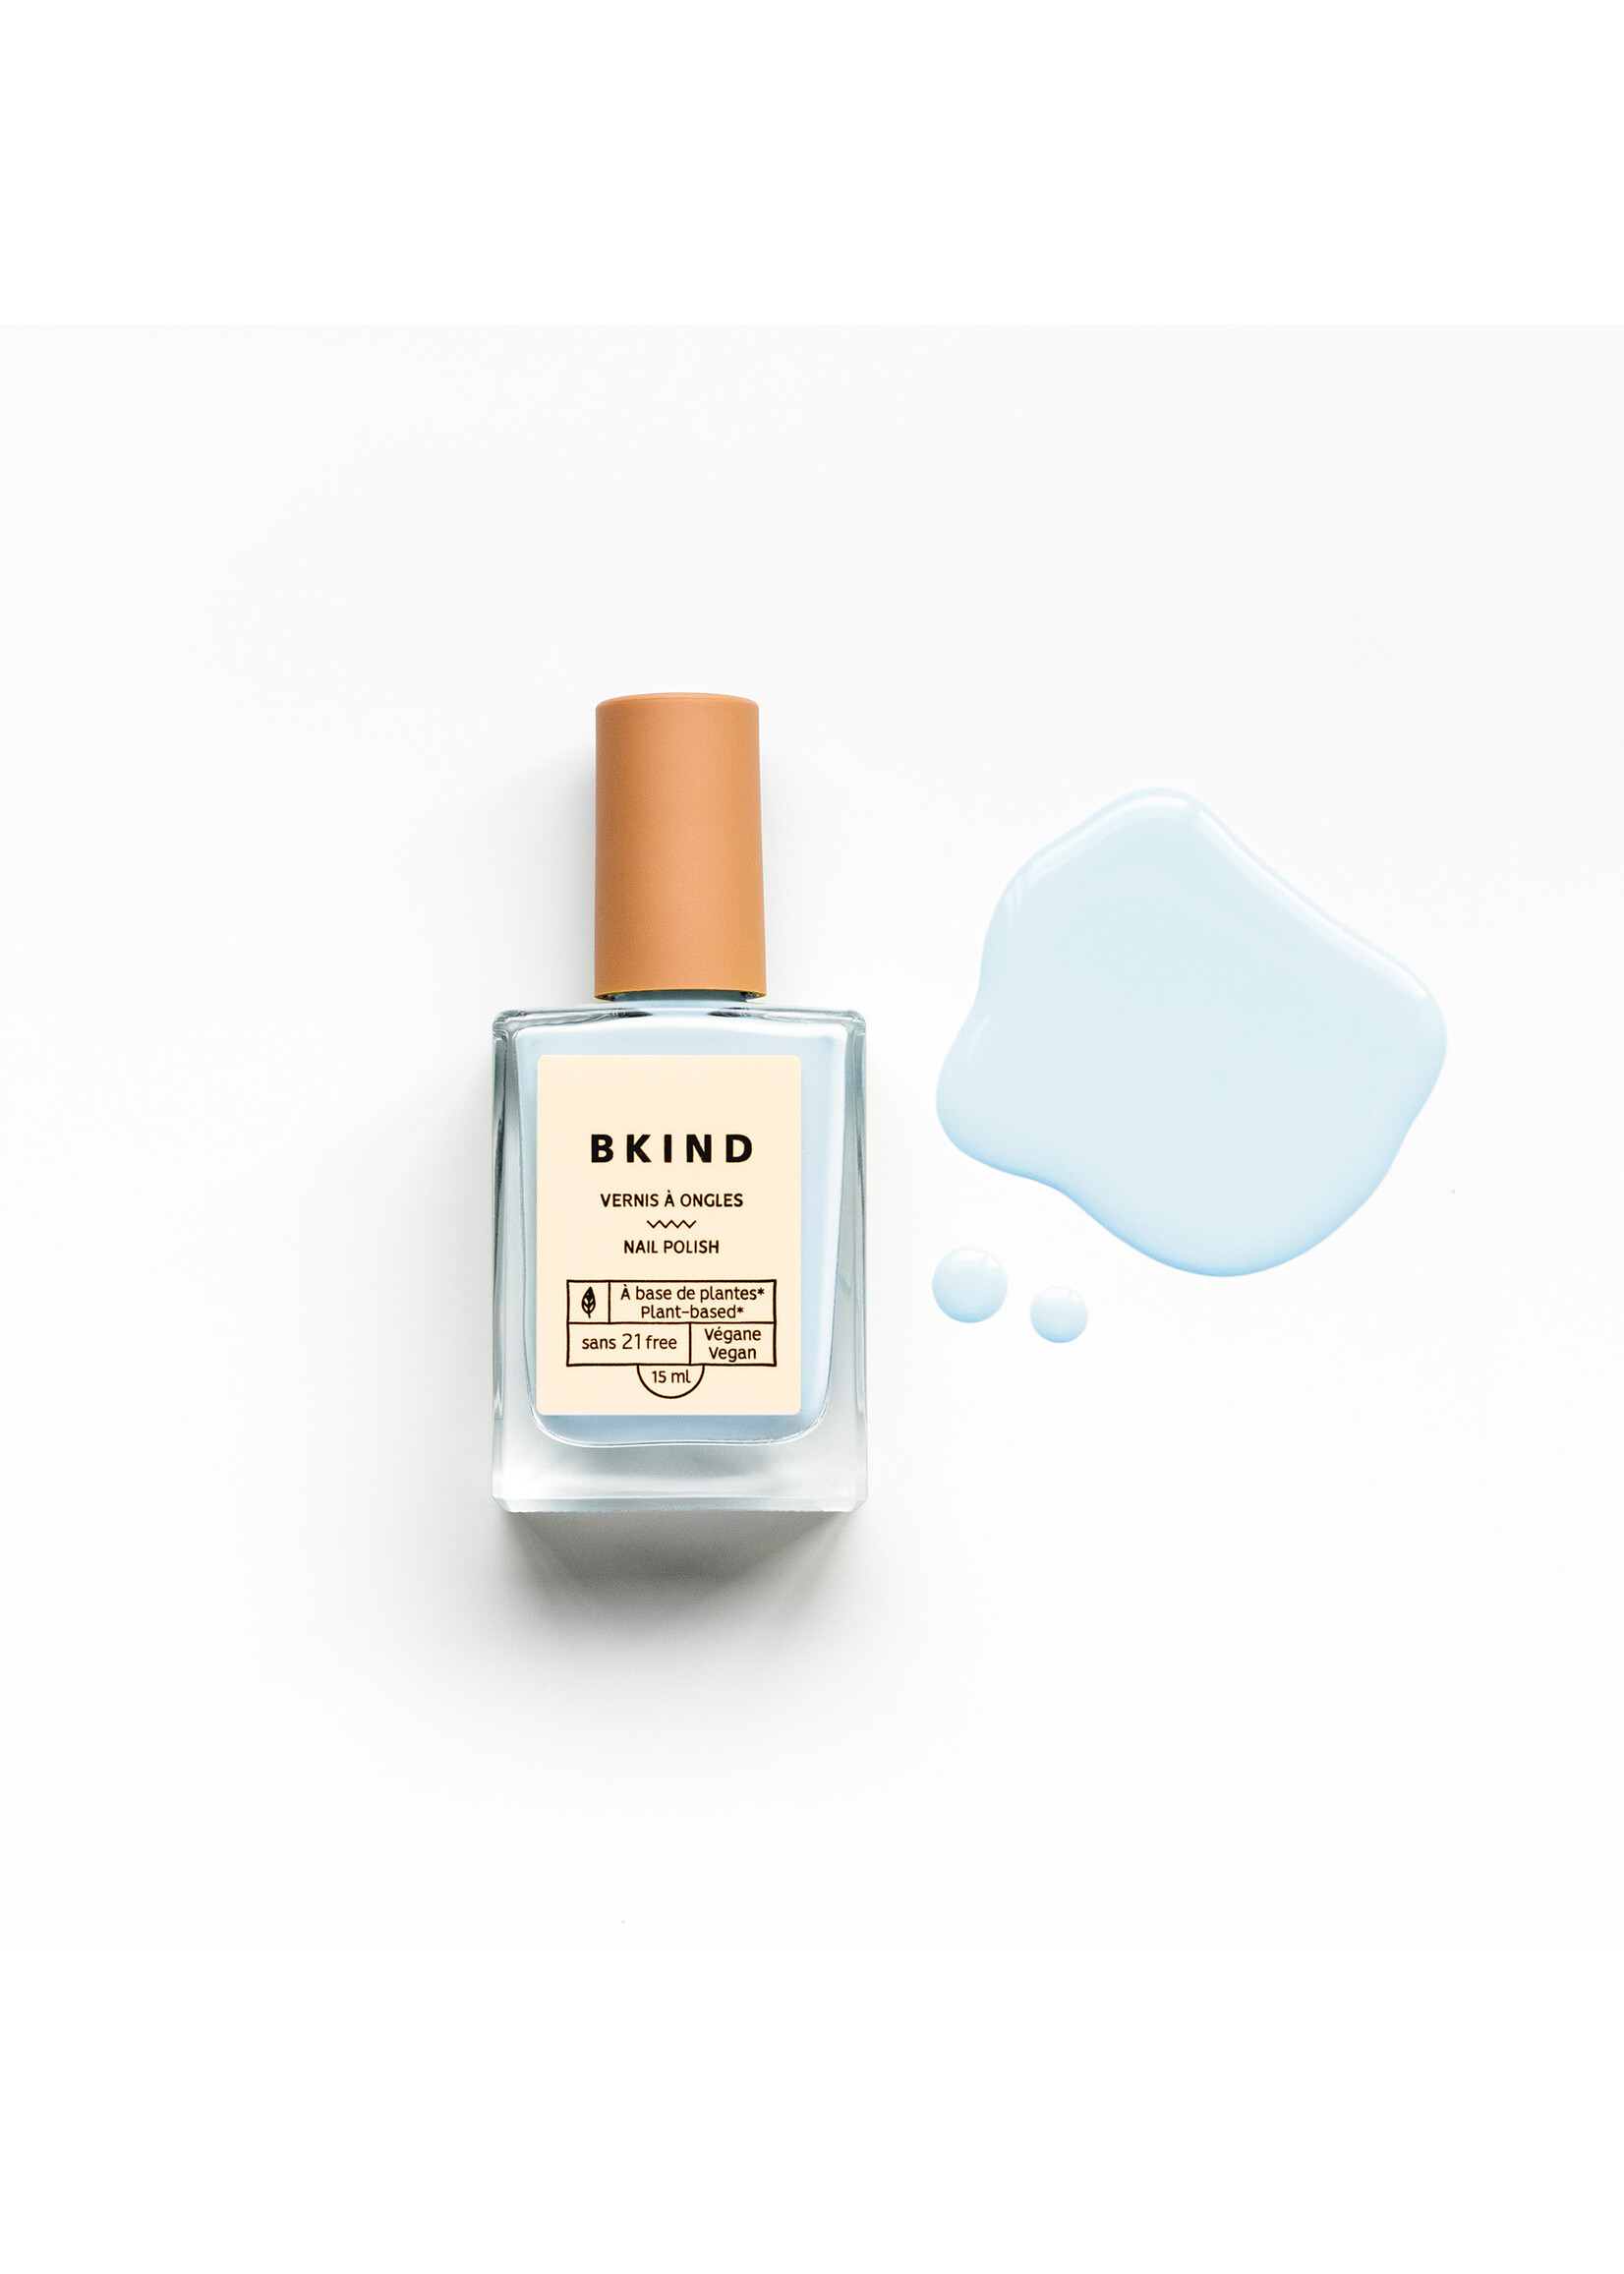 Bkind Vernis à ongle 15ml: Les baby spice